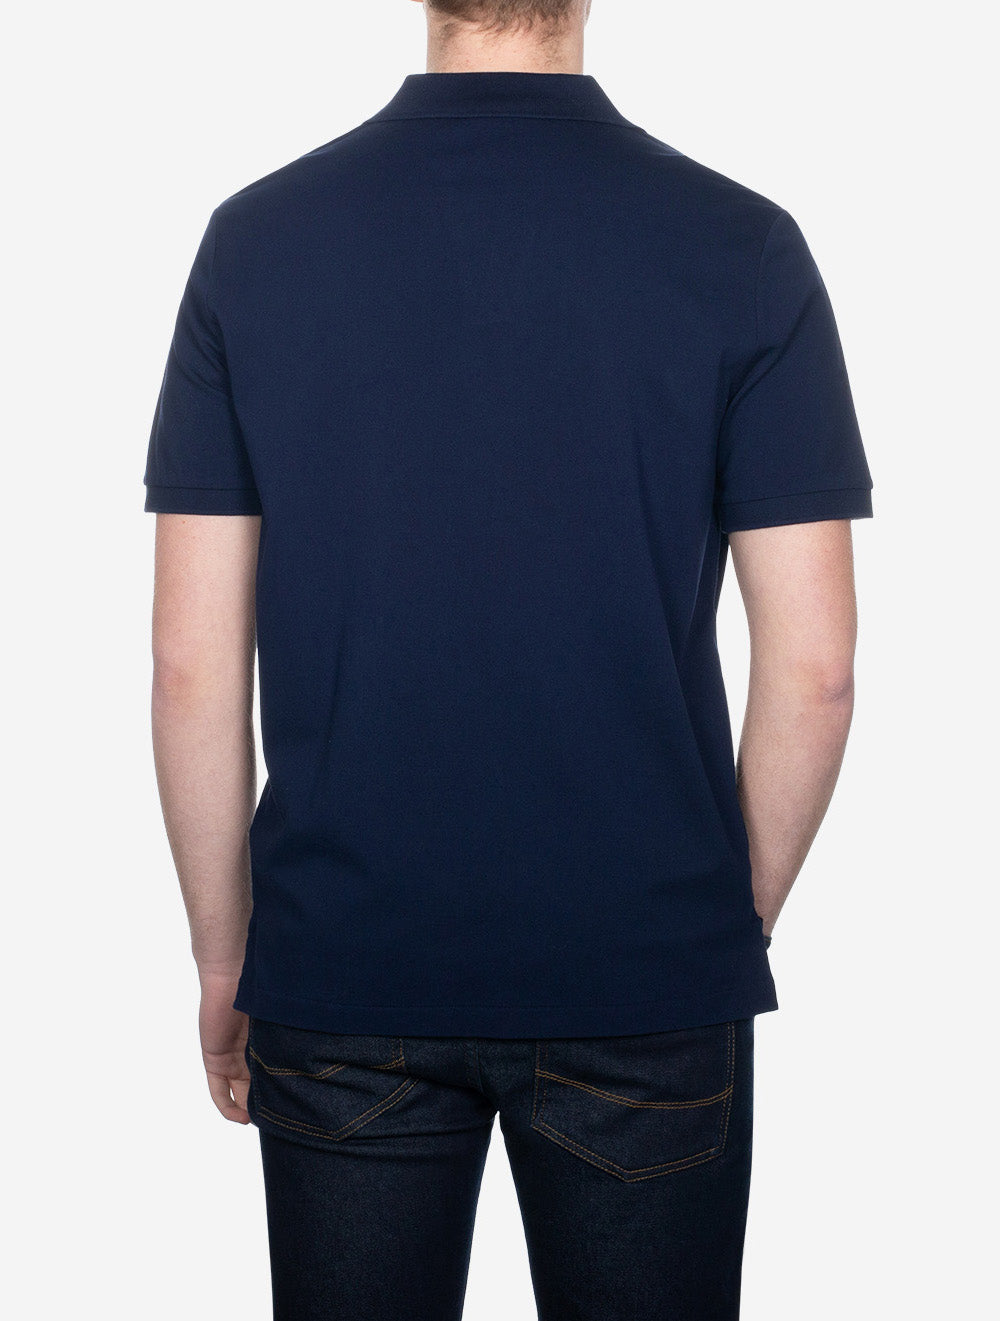 Classic Fit Stretch Polo Shirt Cruise Navy